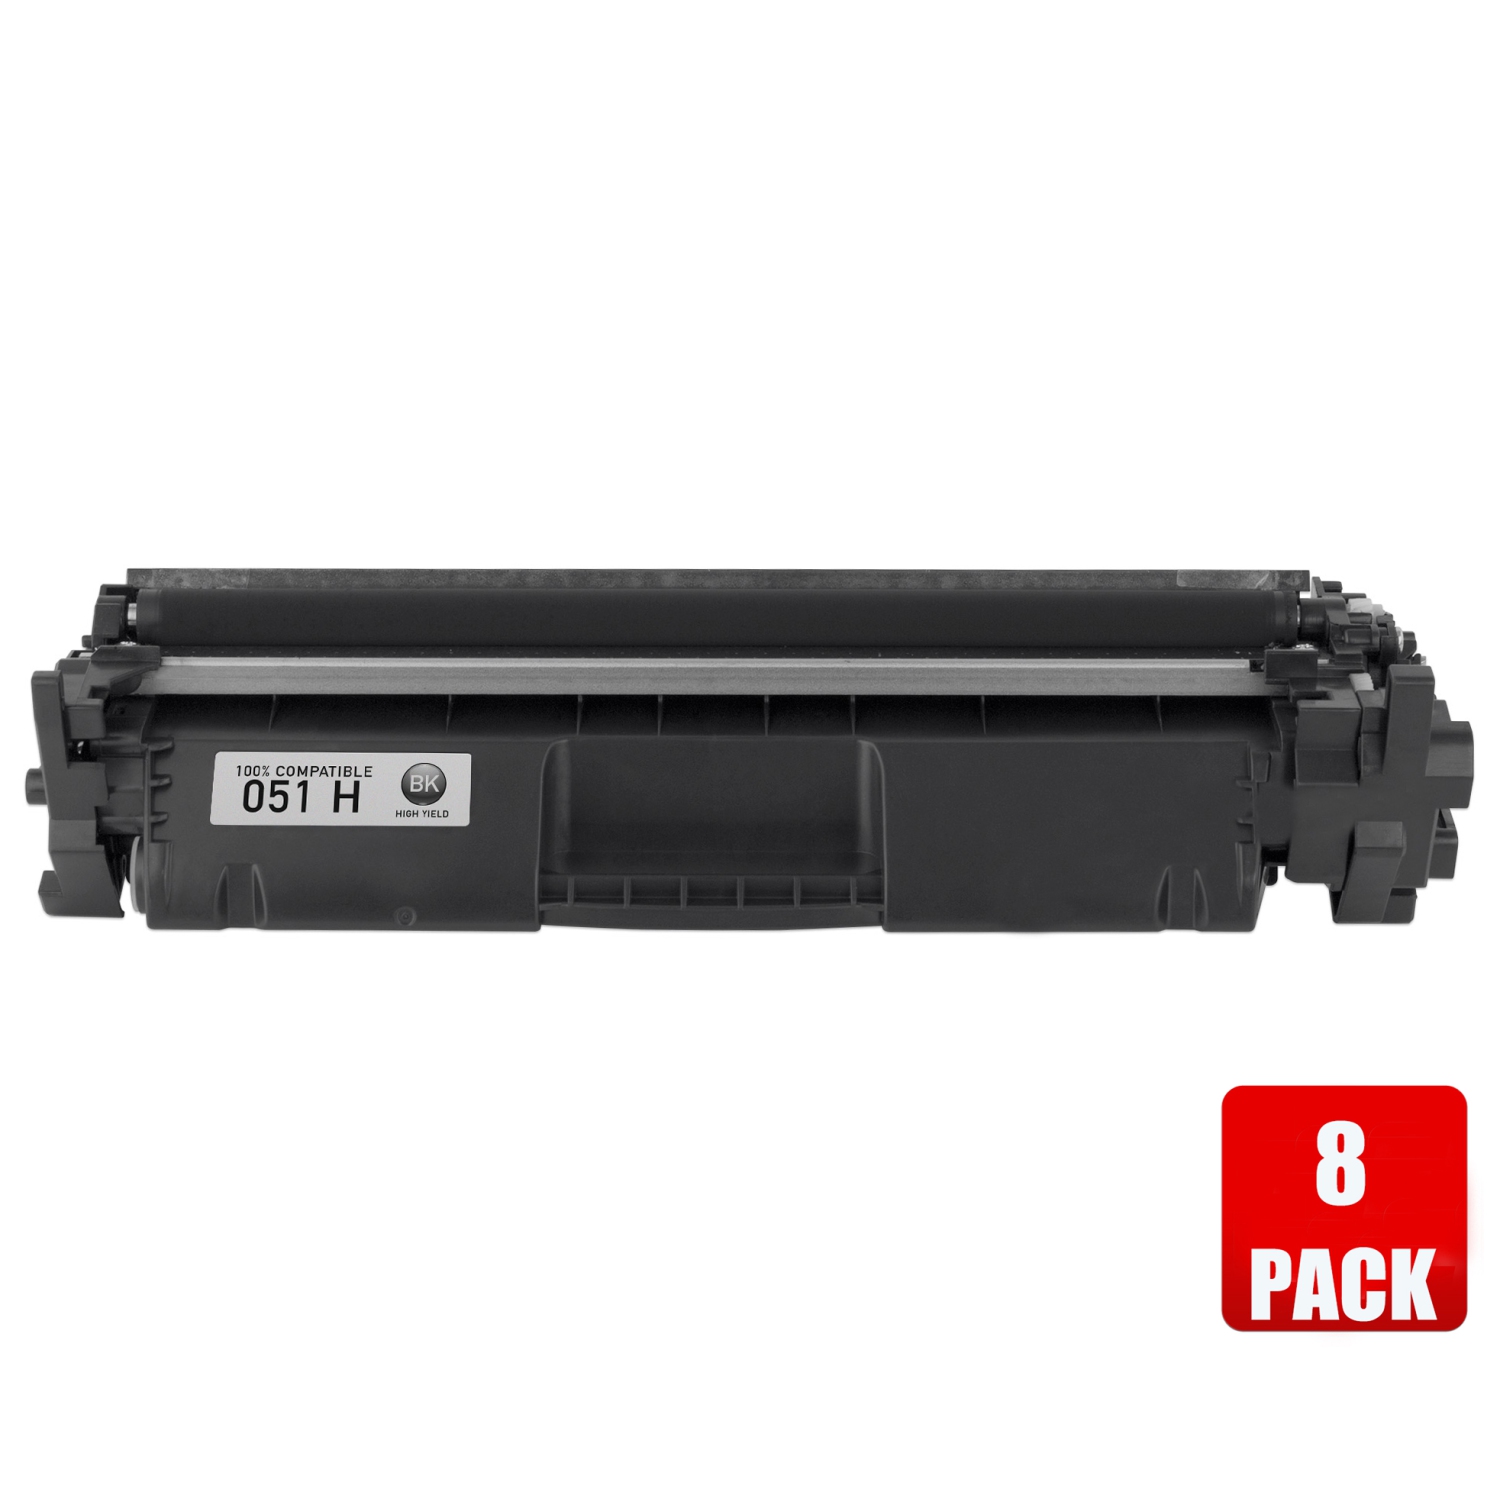 Prime 8 Pack Canon 051H/Canon-051H/051/051H High Yield Black Compatible Toner Cartridge # FREE SHIPPING